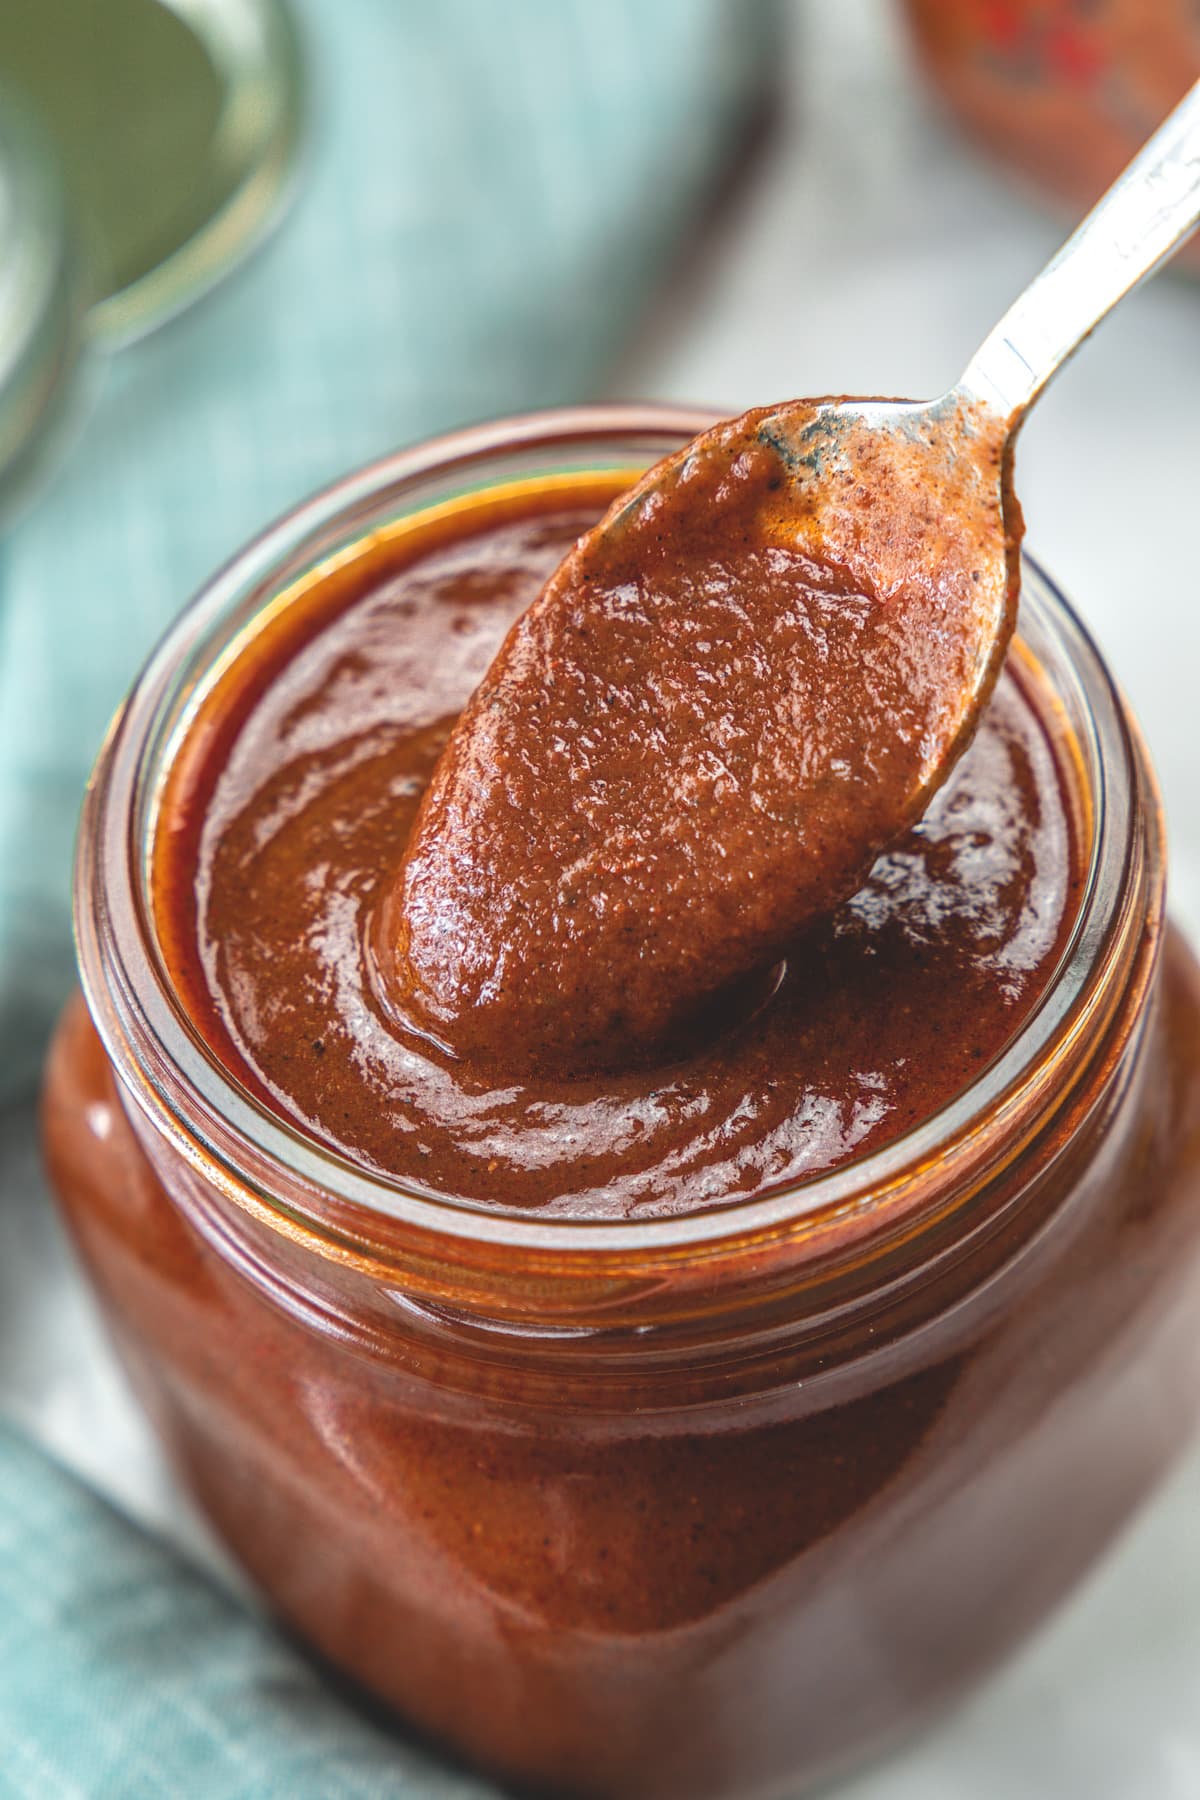 Spoonful of enchilada sauce taking from the jar.